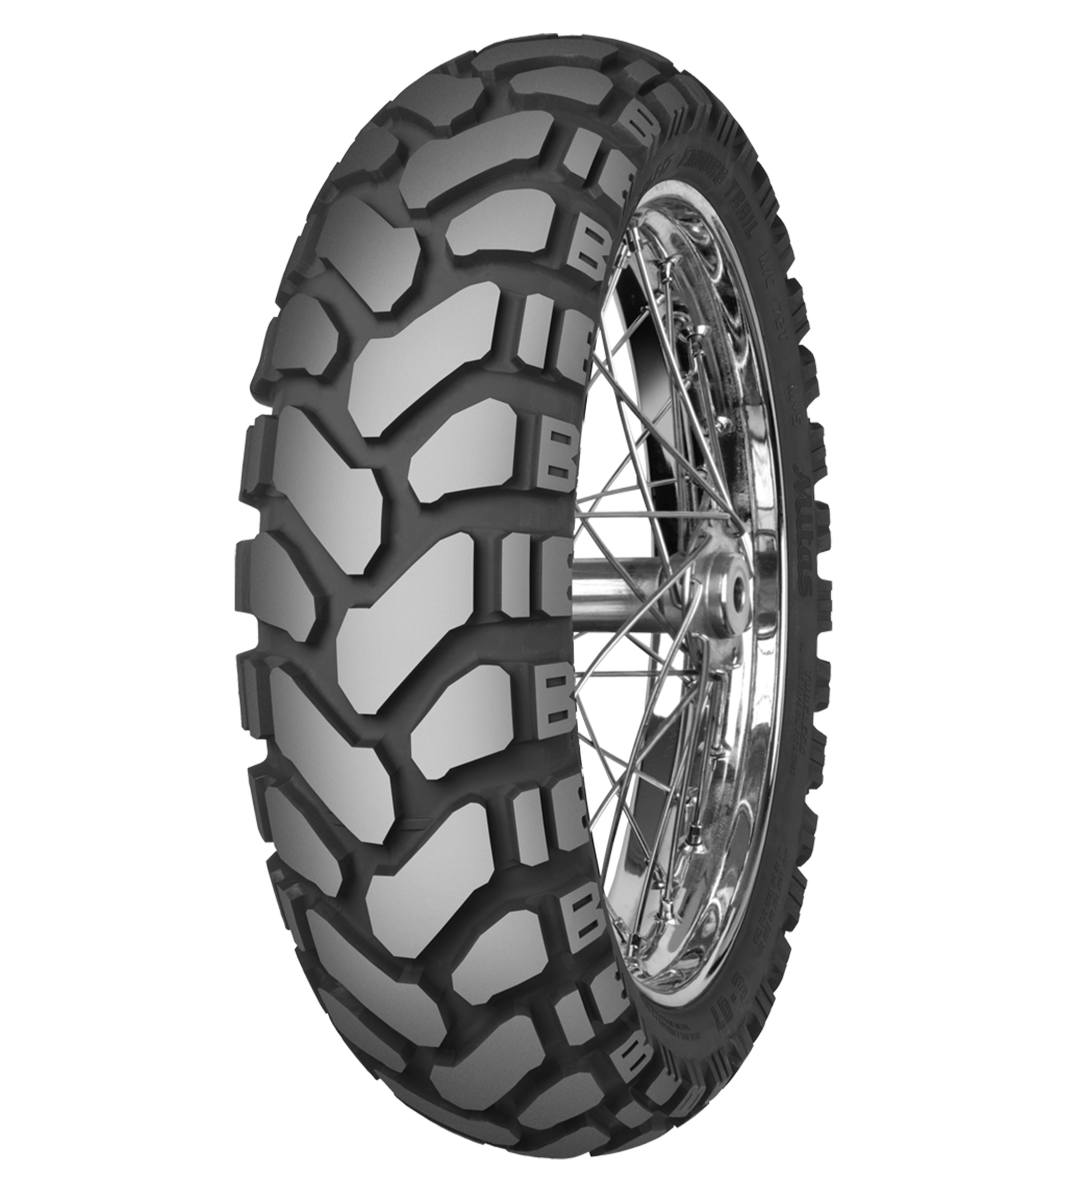 Mitas E-07+ ENDURO TRAIL 150/70B18 Trail ON Trail 70T No Stripe Tubeless Rear Tire, 224061, 150/70B18, Adventure Touring, E Series, E-07+ Enduro Trail, Rear, Trail, Trail ON, Tires - Imported and distributed in North &amp; South America by Lindeco Genuine Powersports - Premier Powersports Equipment and Accessories for Motorcycle Enthusiasts, Professional Riders and Dealers.